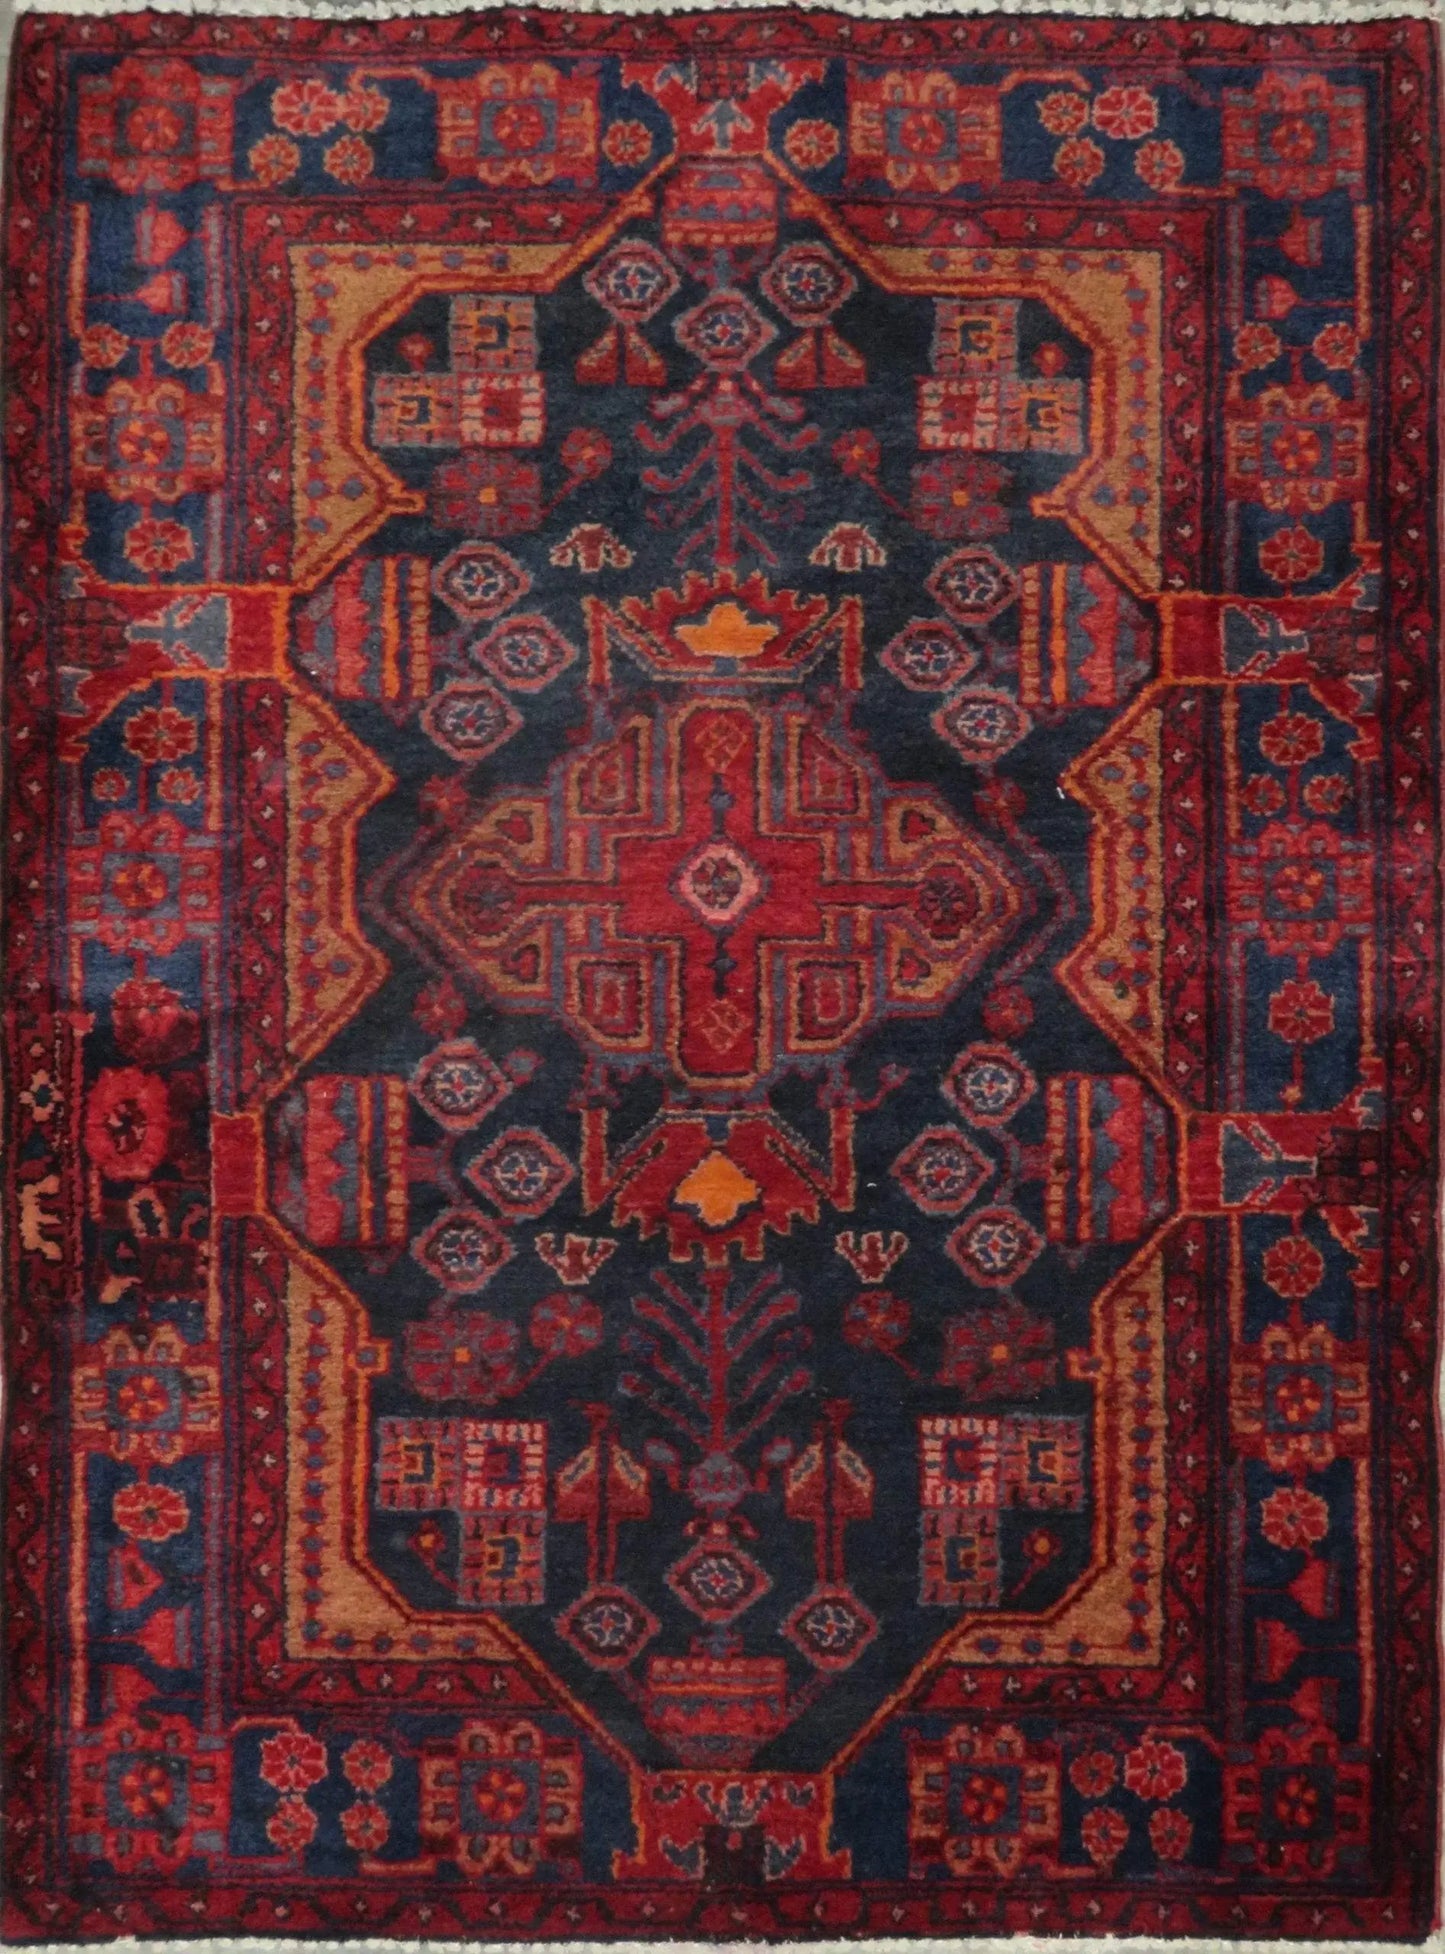 Hand-Knotted Persian Wool Rug _ Luxurious Vintage Design, 5'0" x 3'7", Artisan Crafted